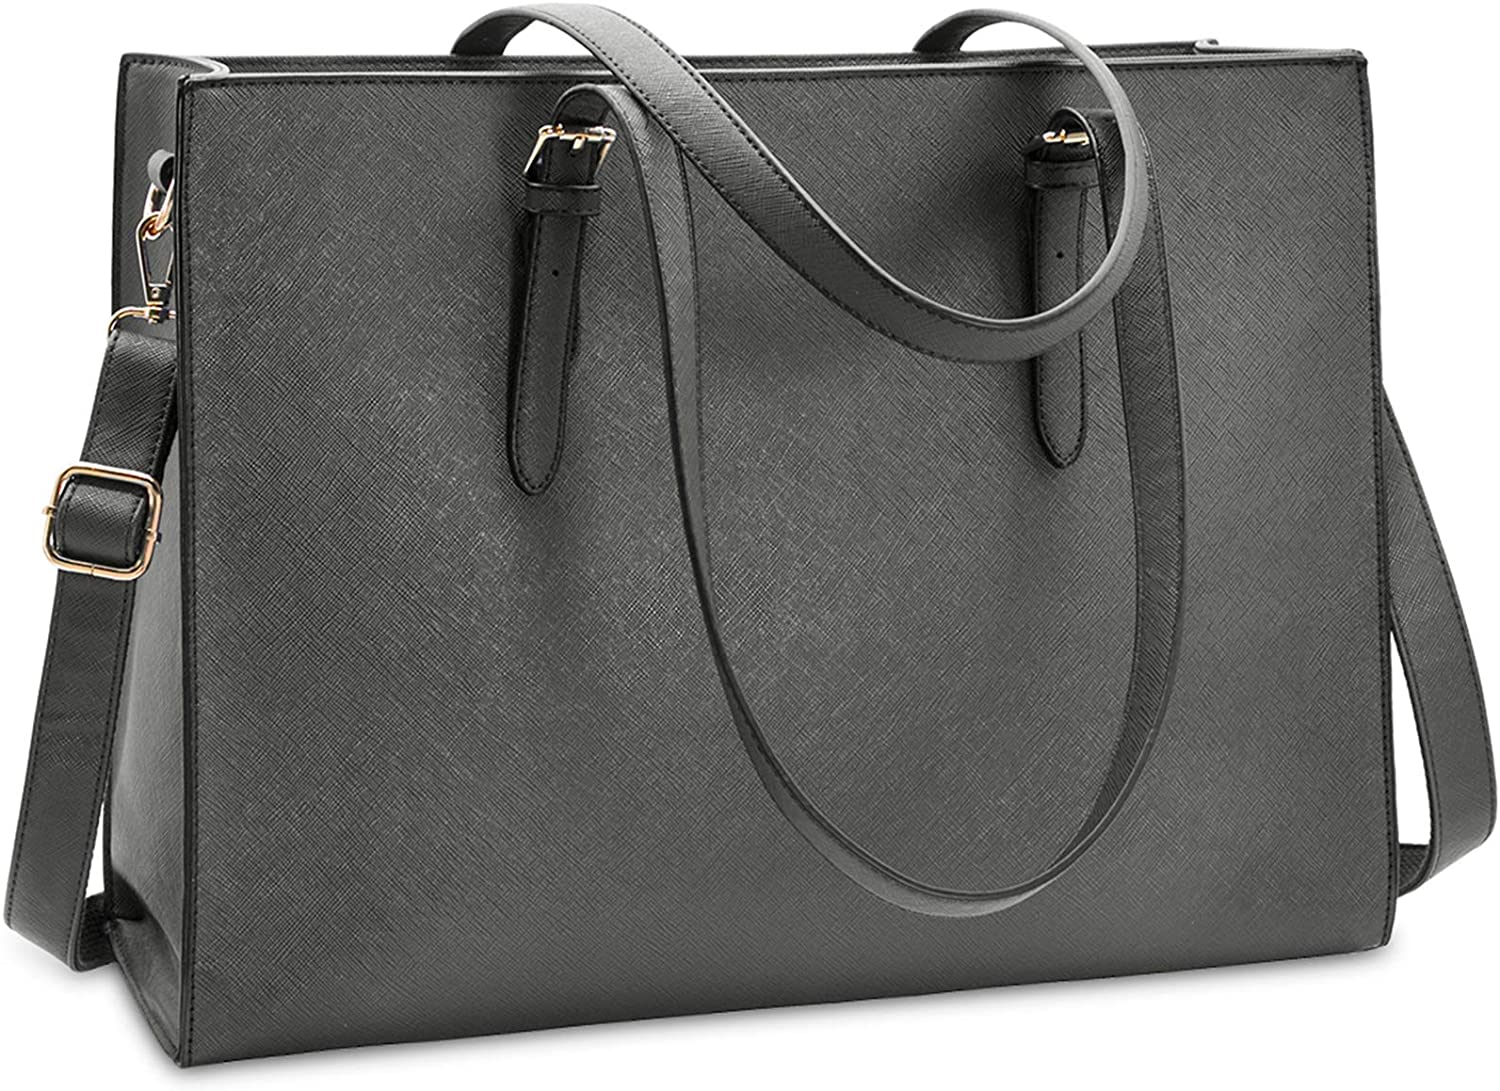 Laptop Bag for Women 15.6 Inch Tote Waterproof Leather Computer Business  Lightweight Office Briefcas…See more Laptop Bag for Women 15.6 Inch Tote